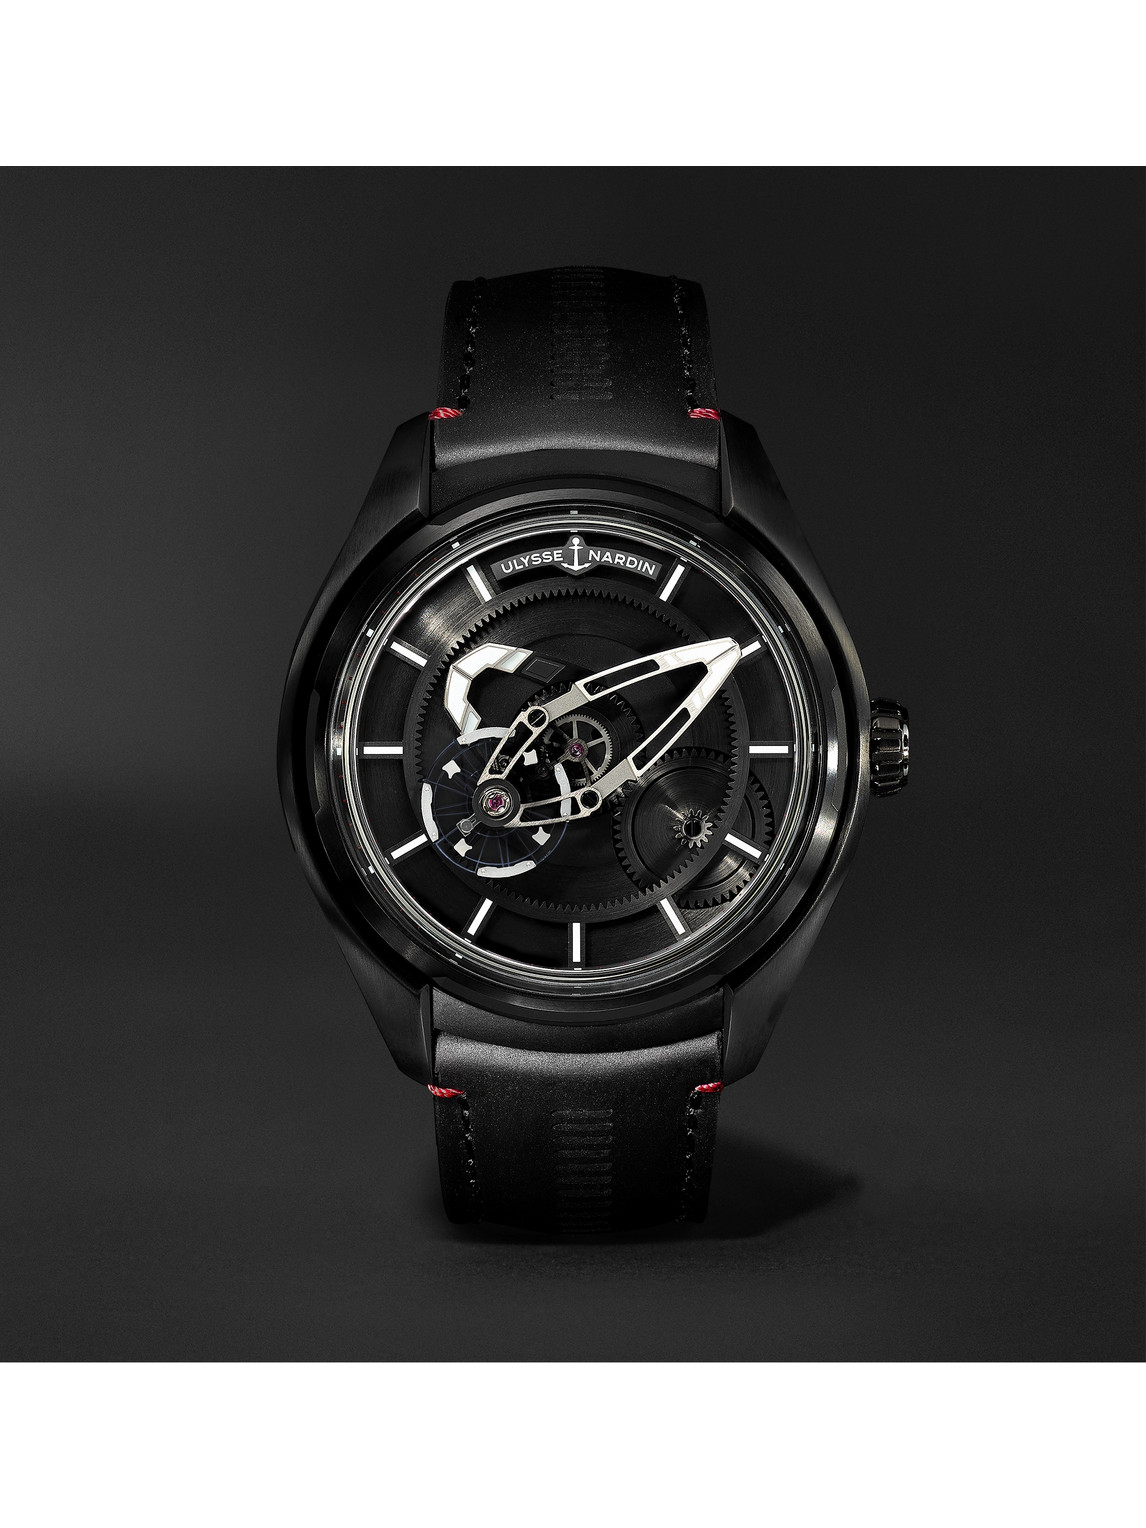 Ulysse Nardin Freak X Ti Automatic 43mm Titanium And Leather Watch, Ref. No. 2303-270.1 In Black